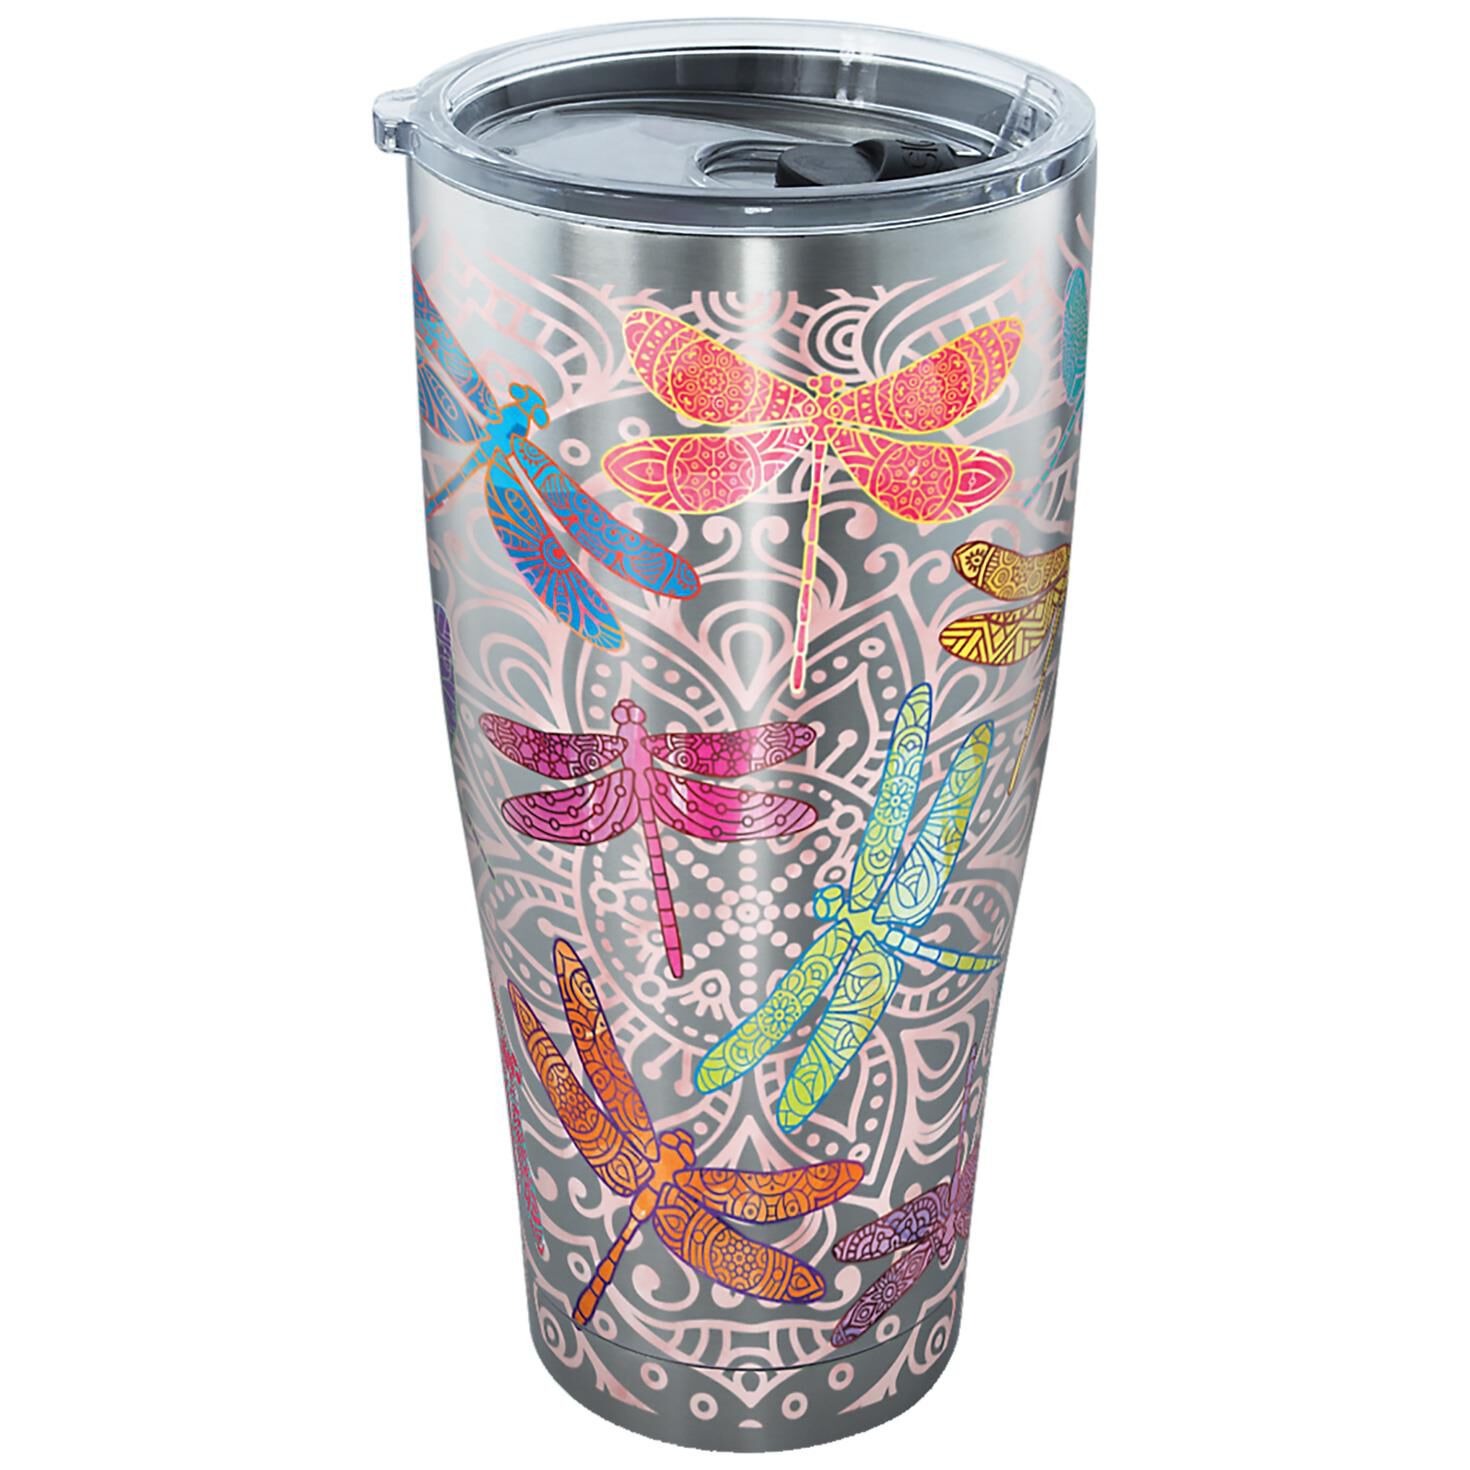 Milwaukee Brewers Tervis 30oz. Pinstripes Stainless Steel Tumbler